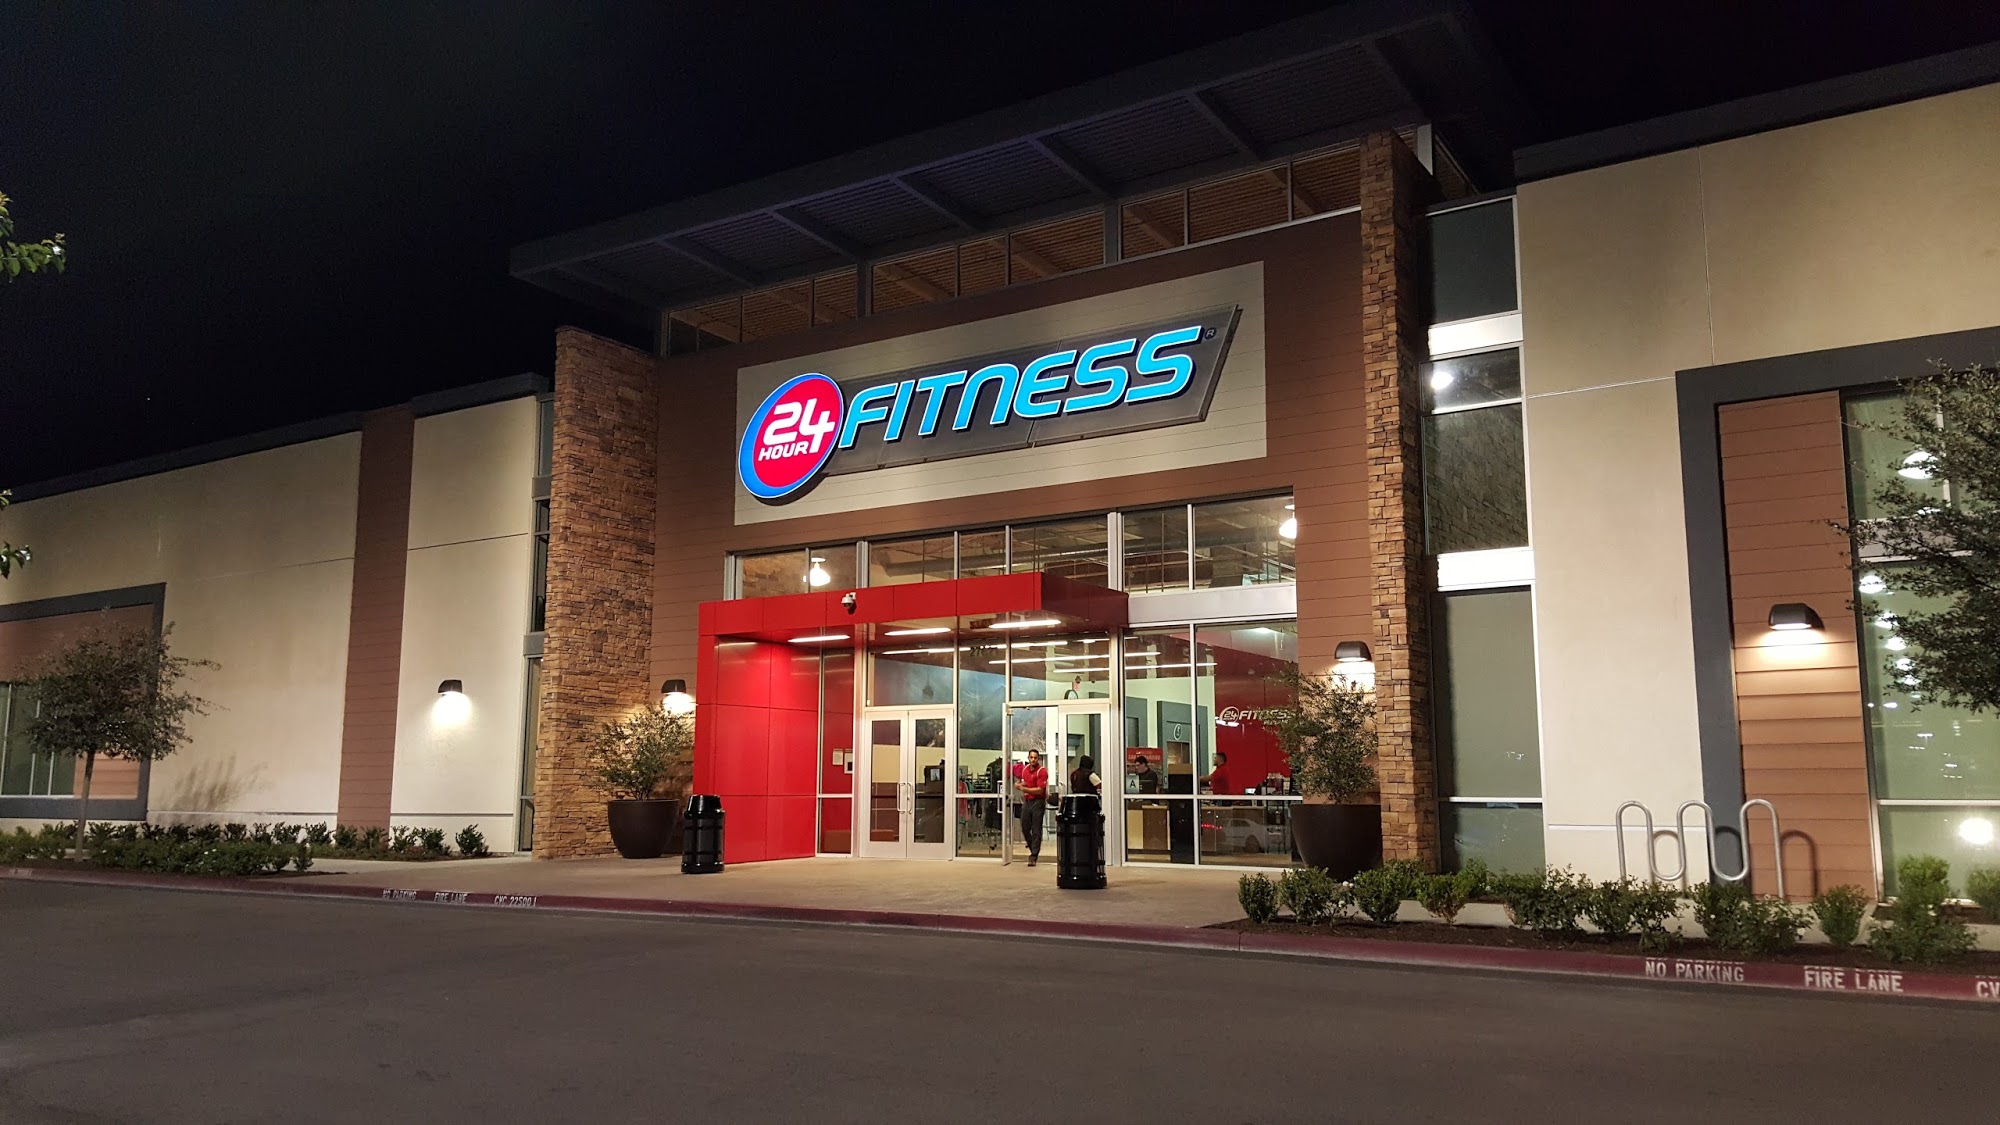 24 Hour Fitness